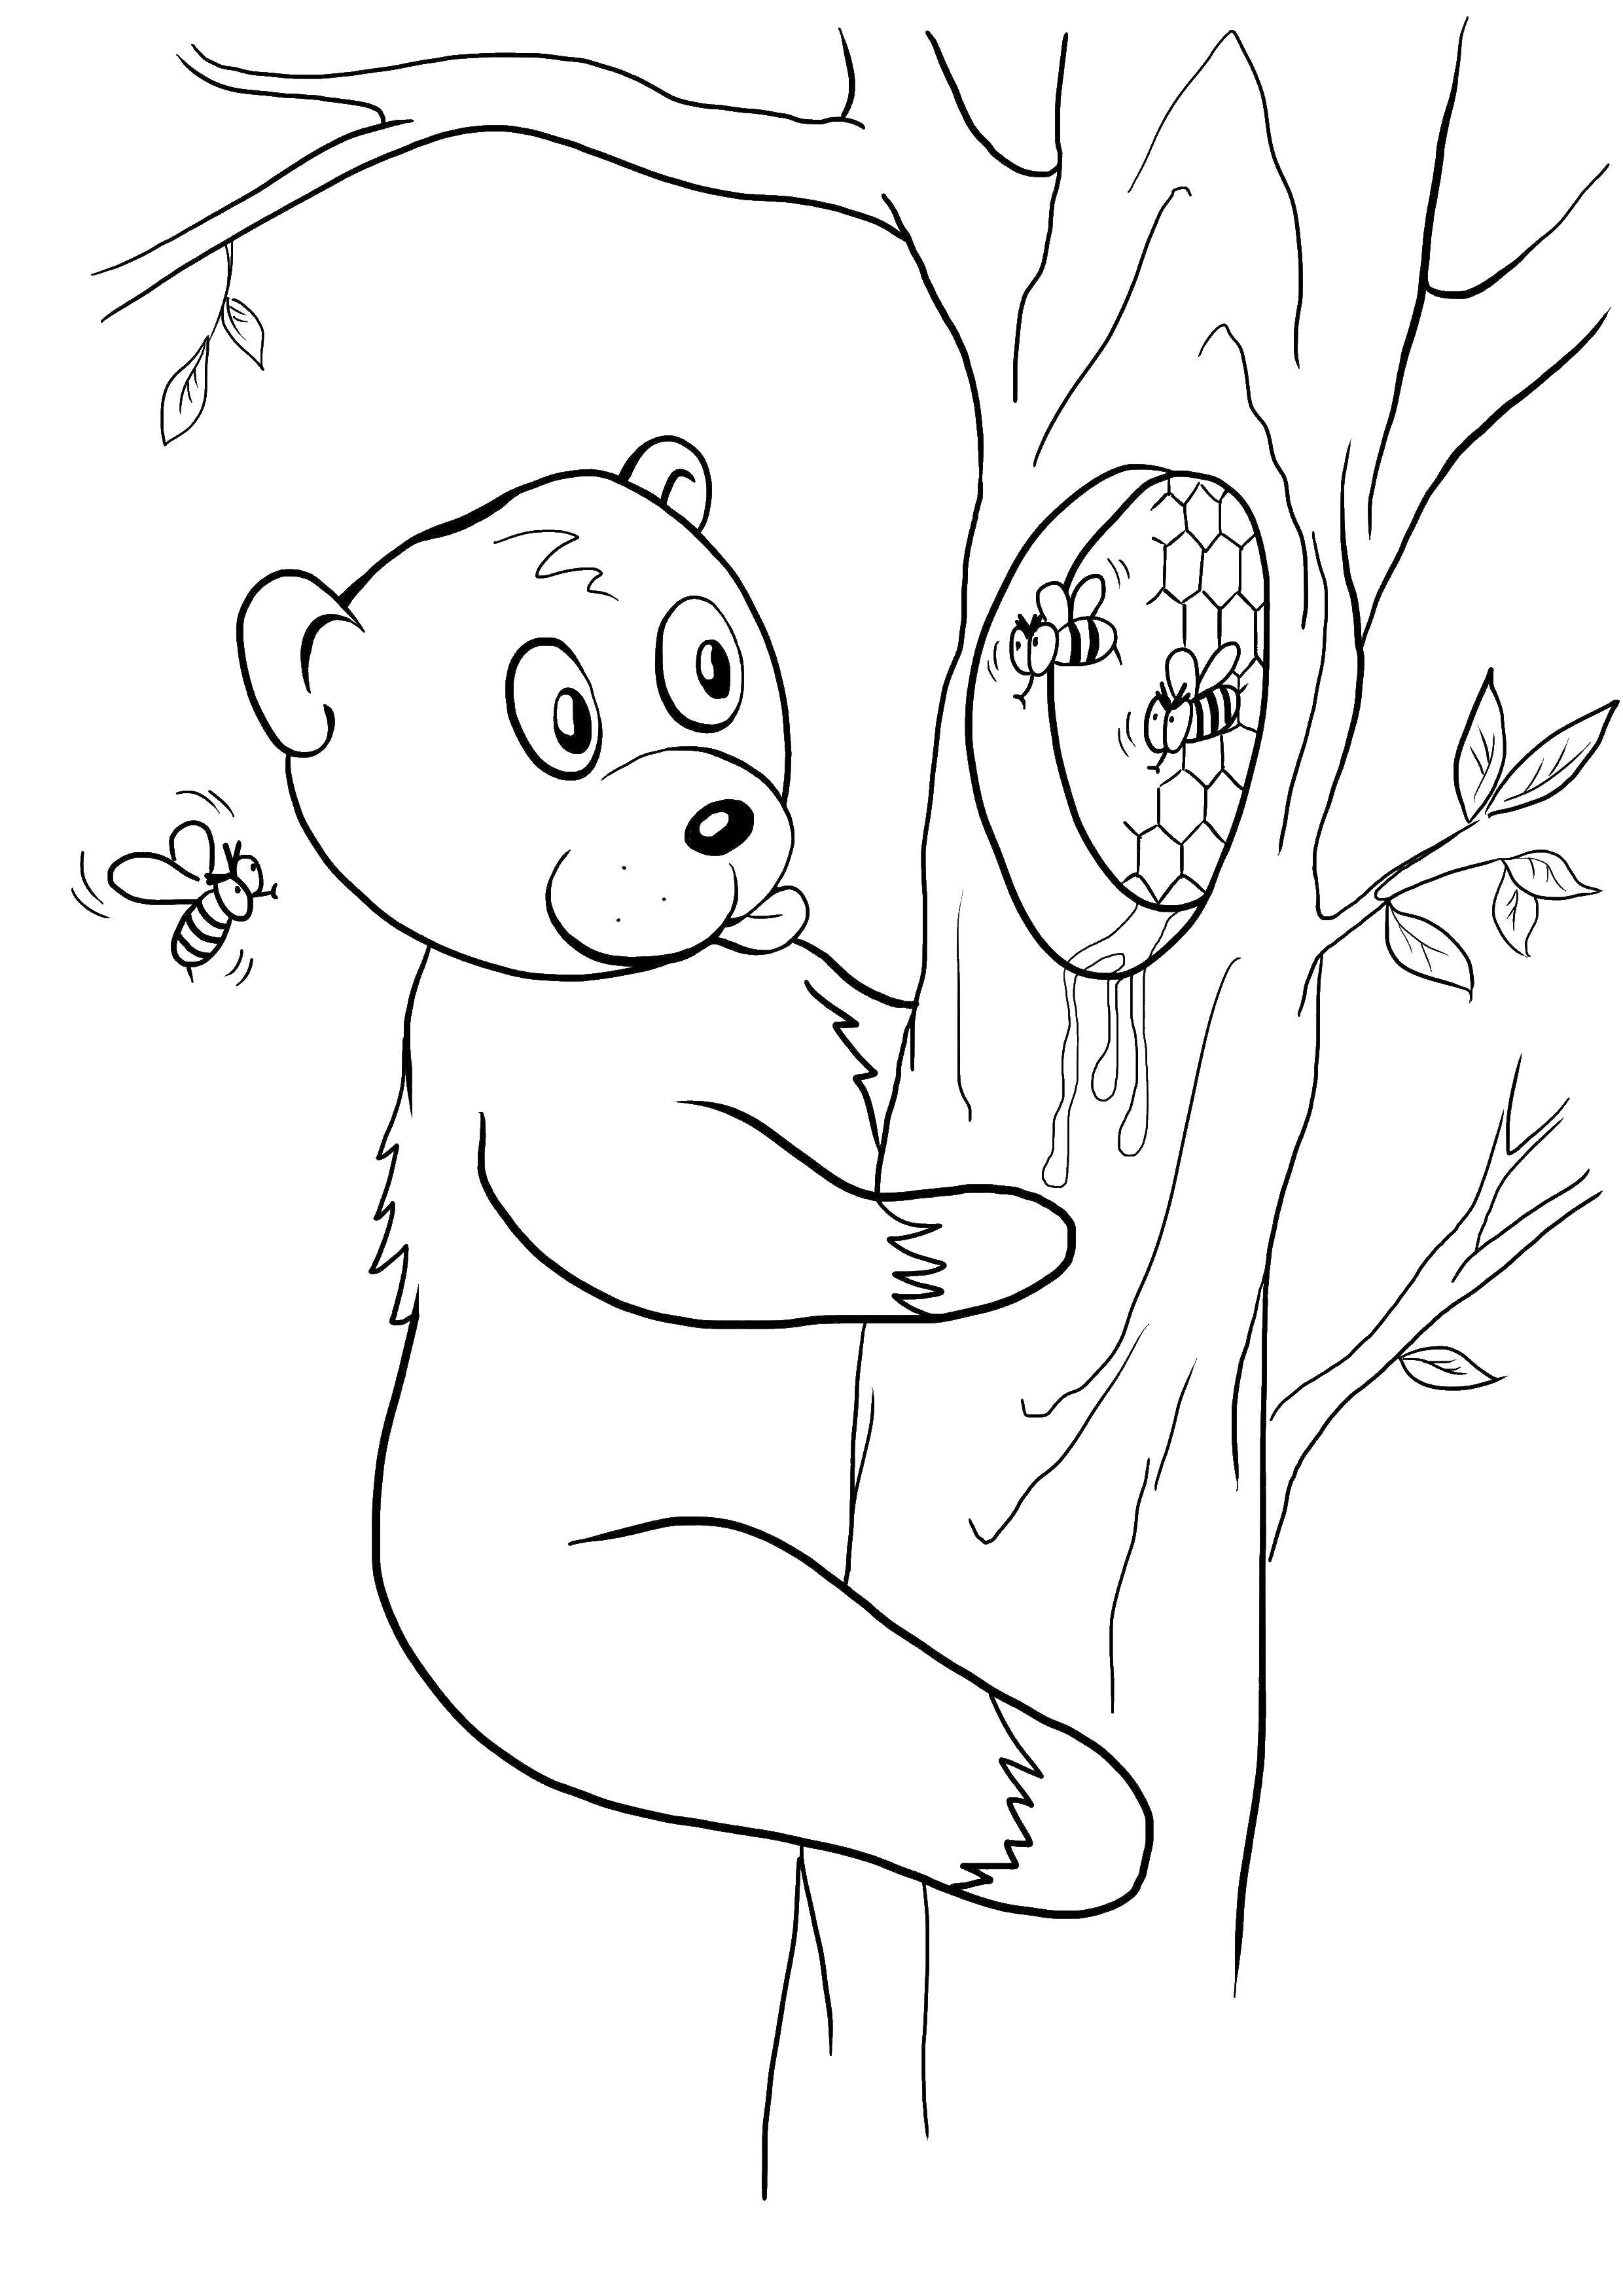 Coloring Bear and uly. Category Honey. Tags:  honey, bees, bear, uly.